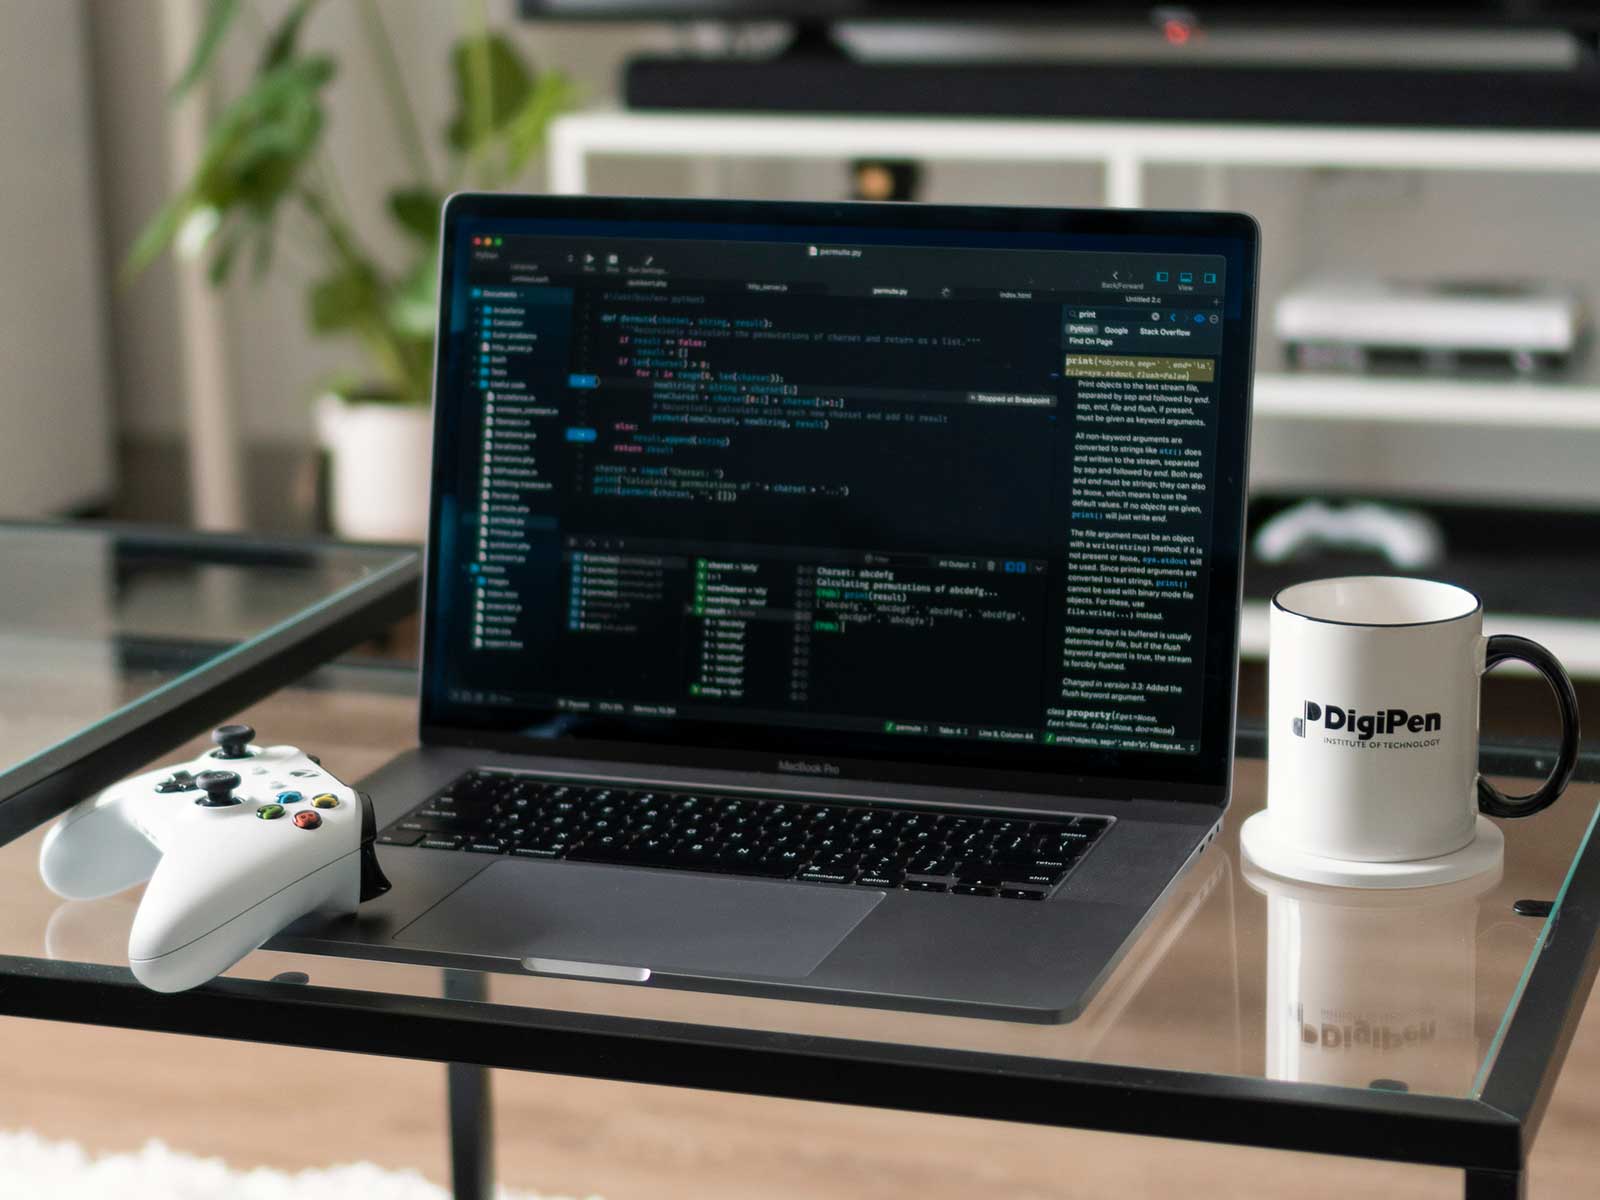 A laptop sits between an Xbox controller and a DigiPen branded mug.